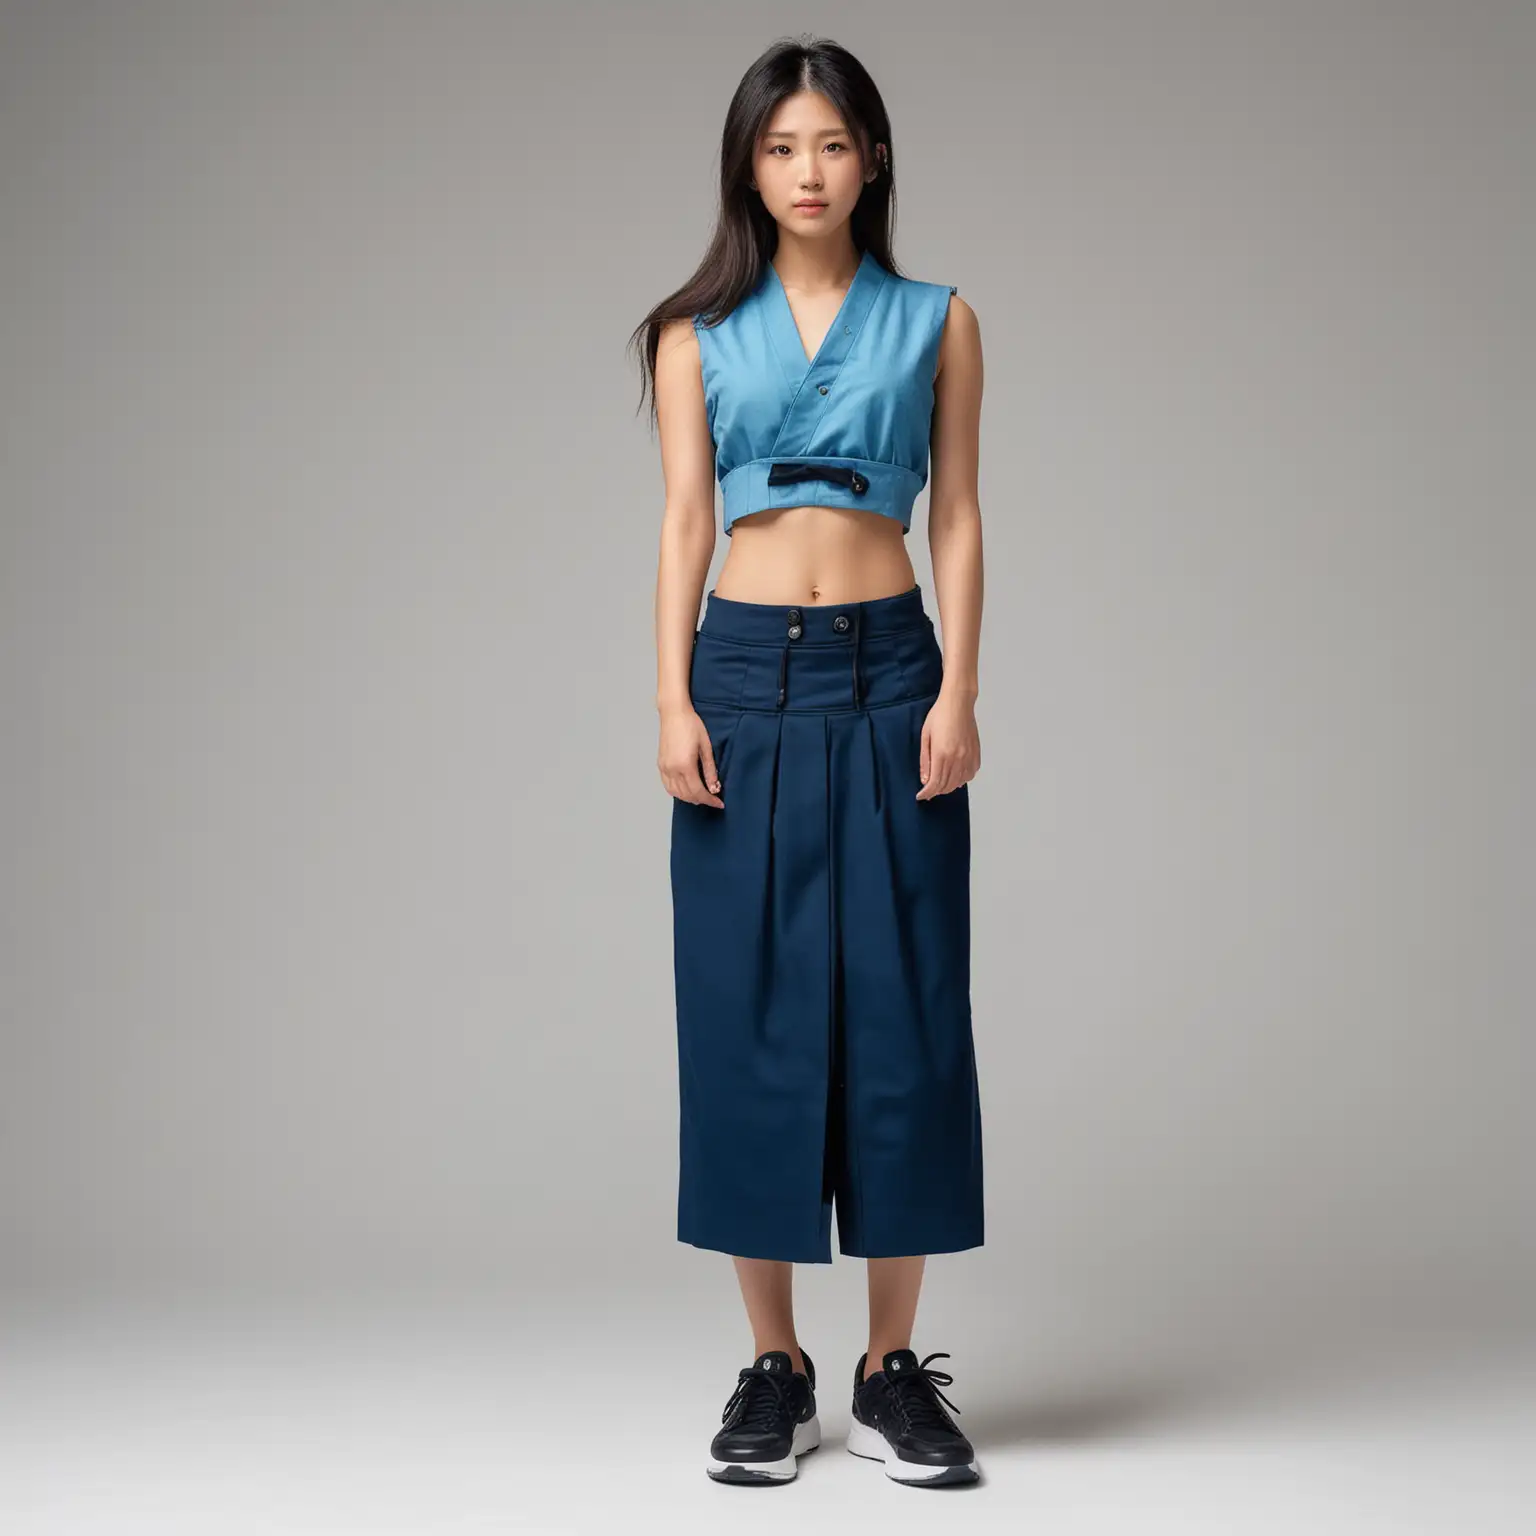 Standing full body view, toned beautiful Japanese supermodel with thin waist and long legs in sleeveless, azure vest top with black buttons, midriff exposed, puffy azure hakama skirt, black sneakers, sneakers, white background